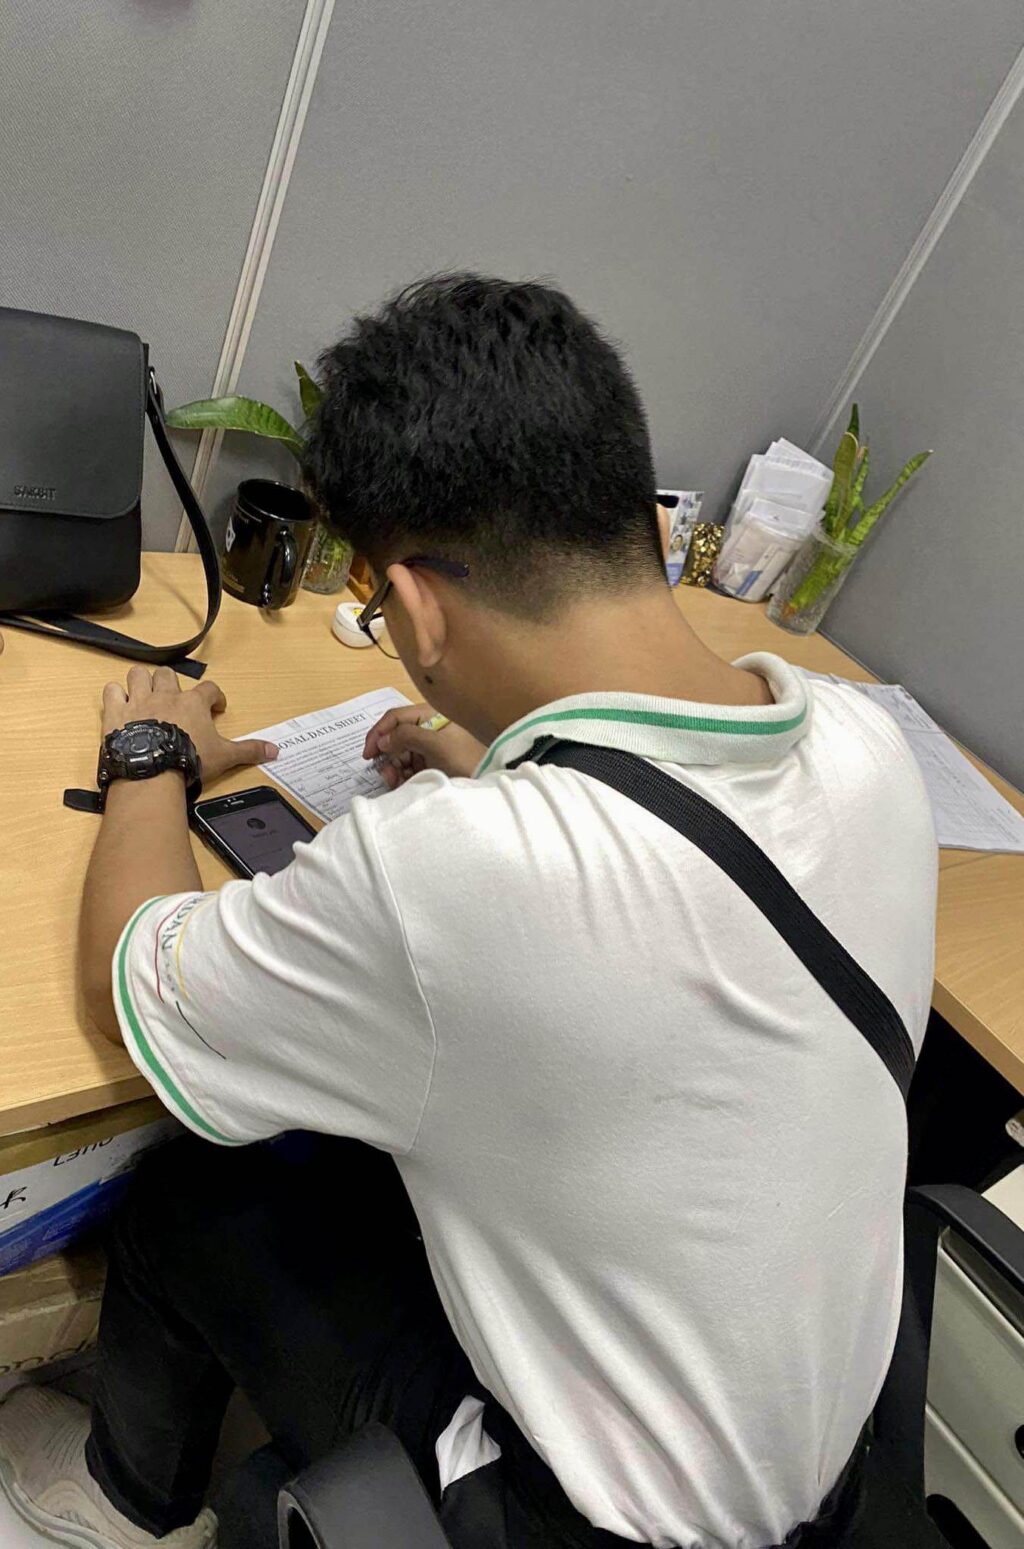 17-year-old boy allegedly abandoned by mom now working at Mandaue City Hall. Daven has been given by the Department of Labor and Employment to work at city hall before he turns 18 as long as he is not assigned in hazardous jobs. | Mary Rose Sagarino